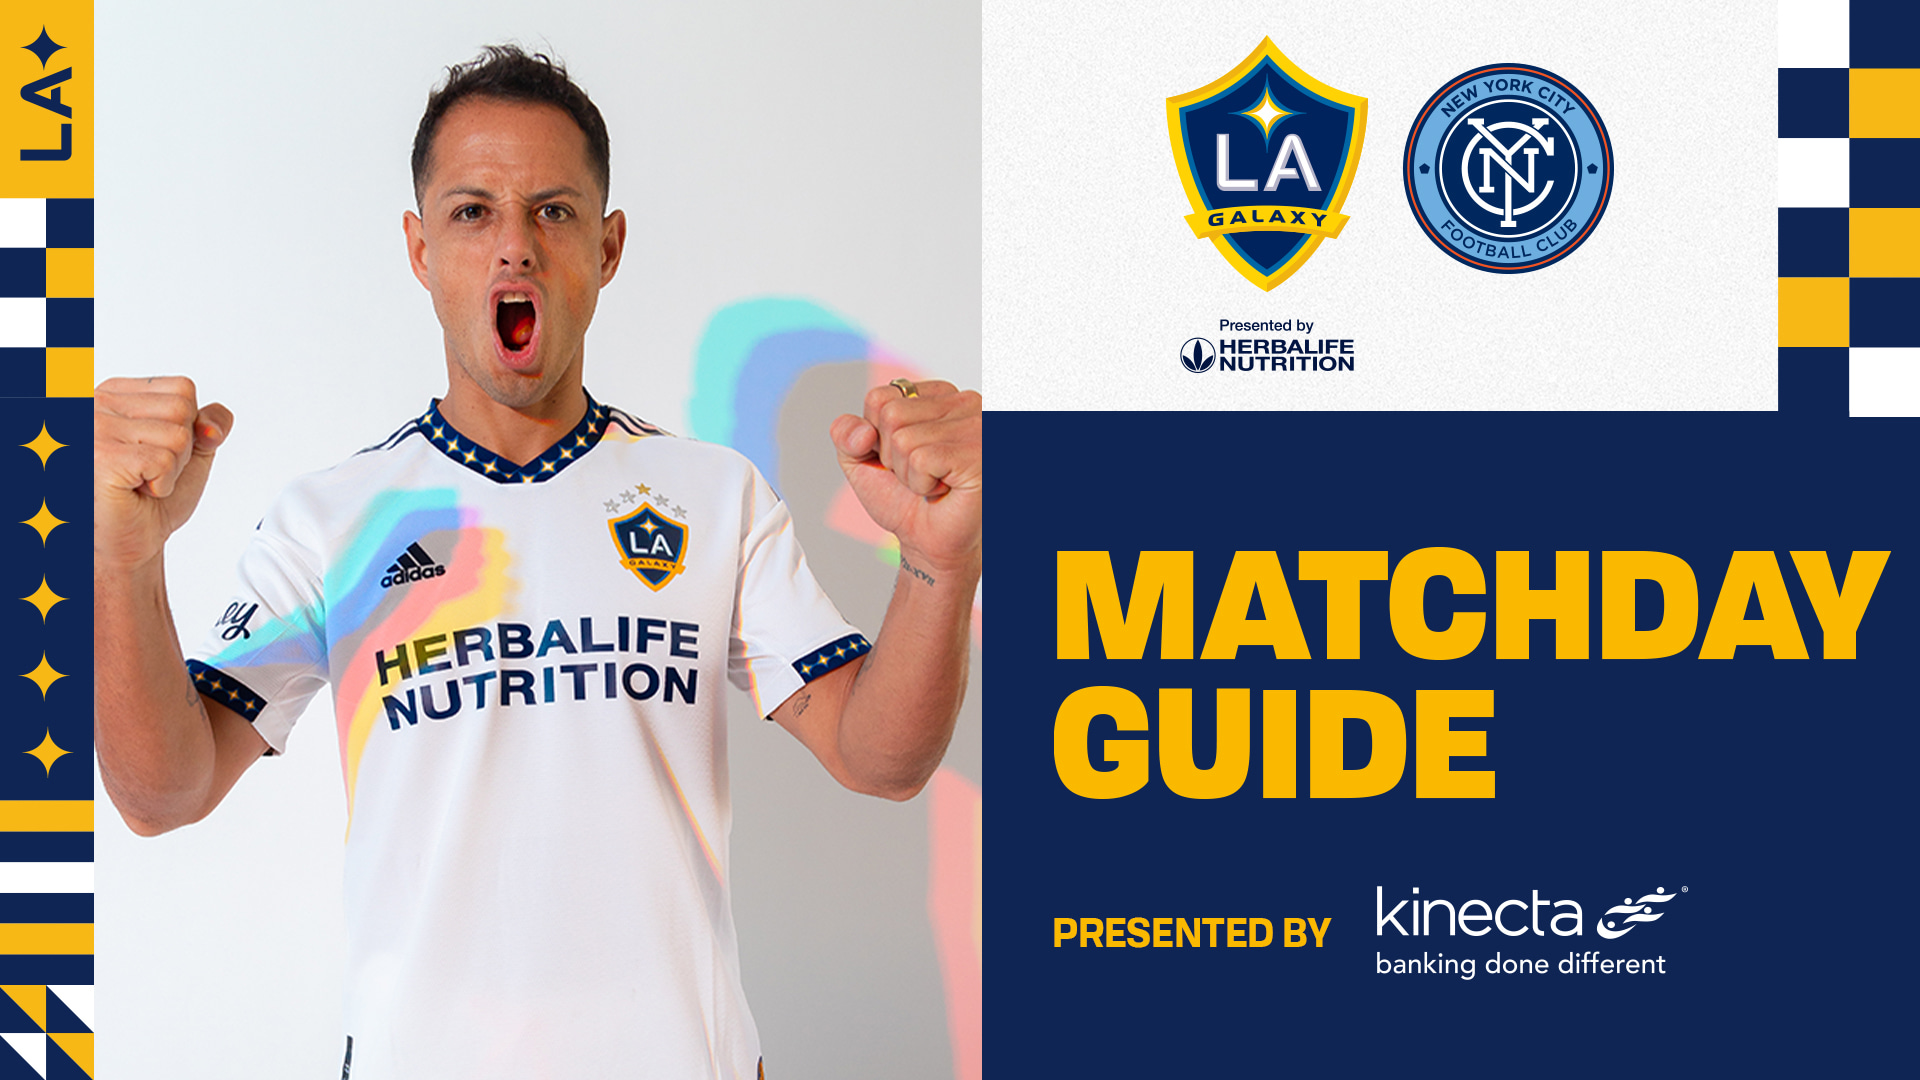 Matchday Guide presented by Kinecta: LA Galaxy vs. New York City FC, February 27, 2022